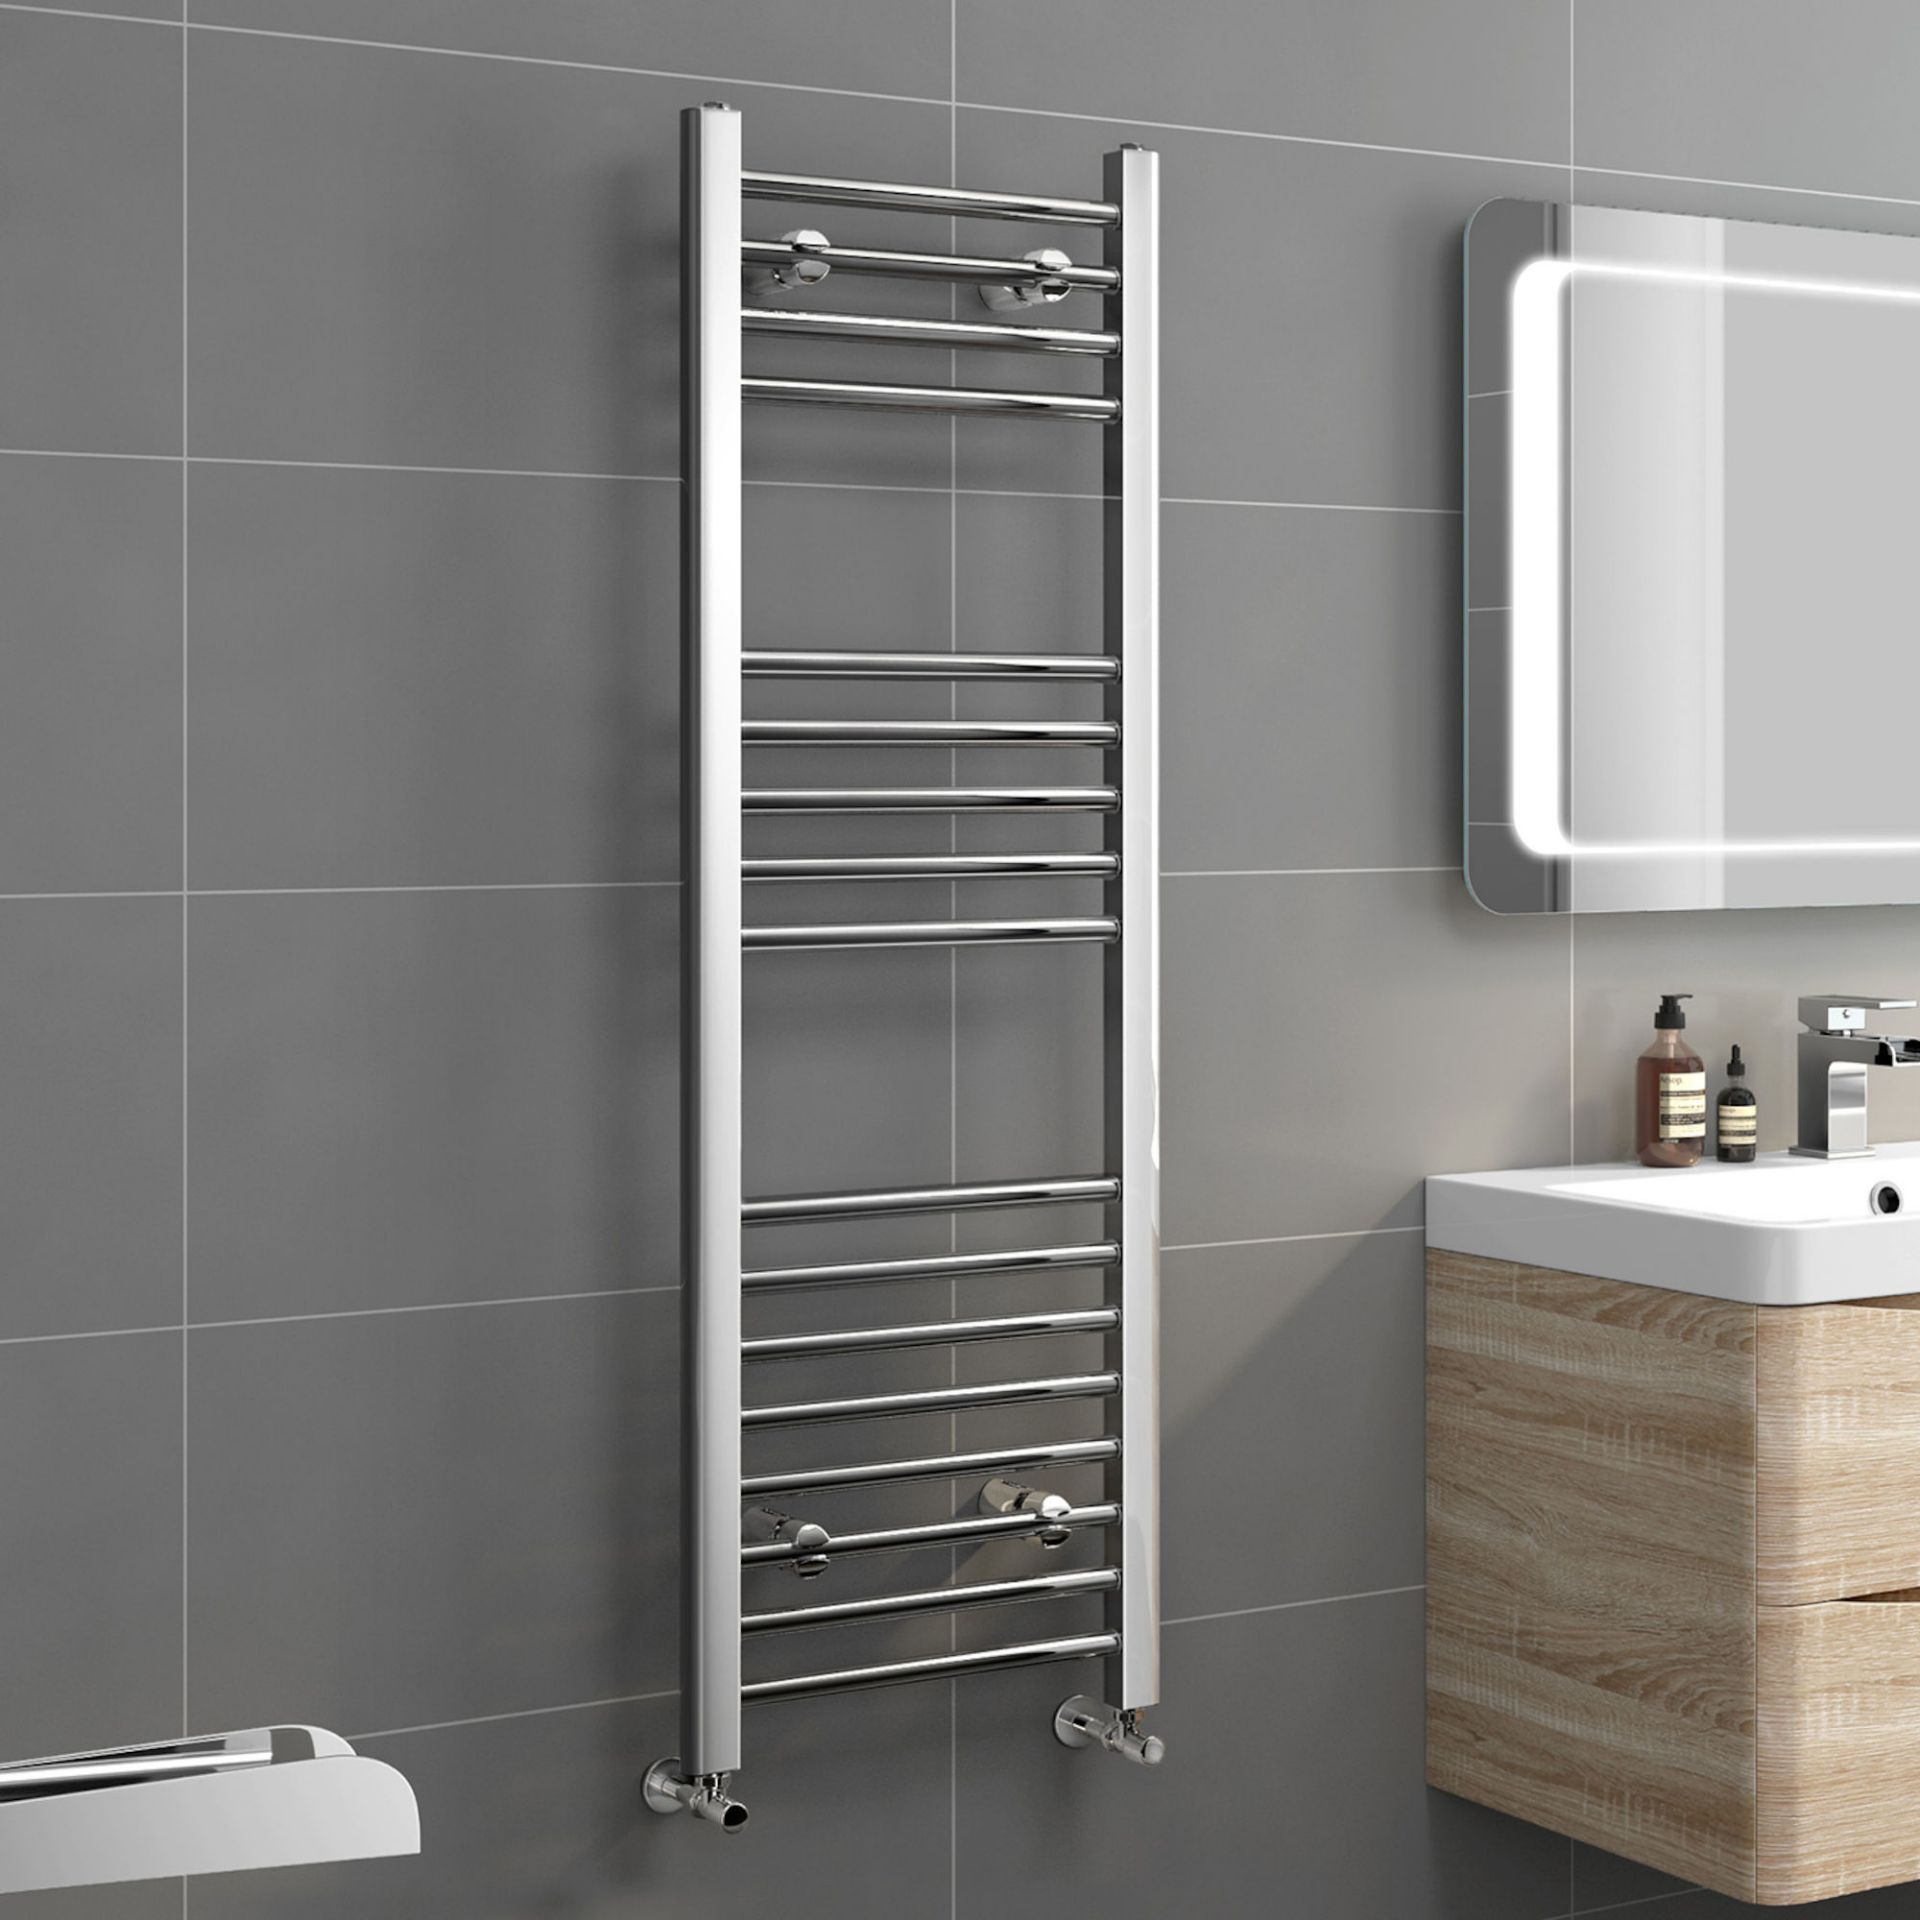 (TP28) 1200x400mm - 20mm Tubes - Chrome Heated Straight Rail Ladder Towel Radiator. Made from chrome